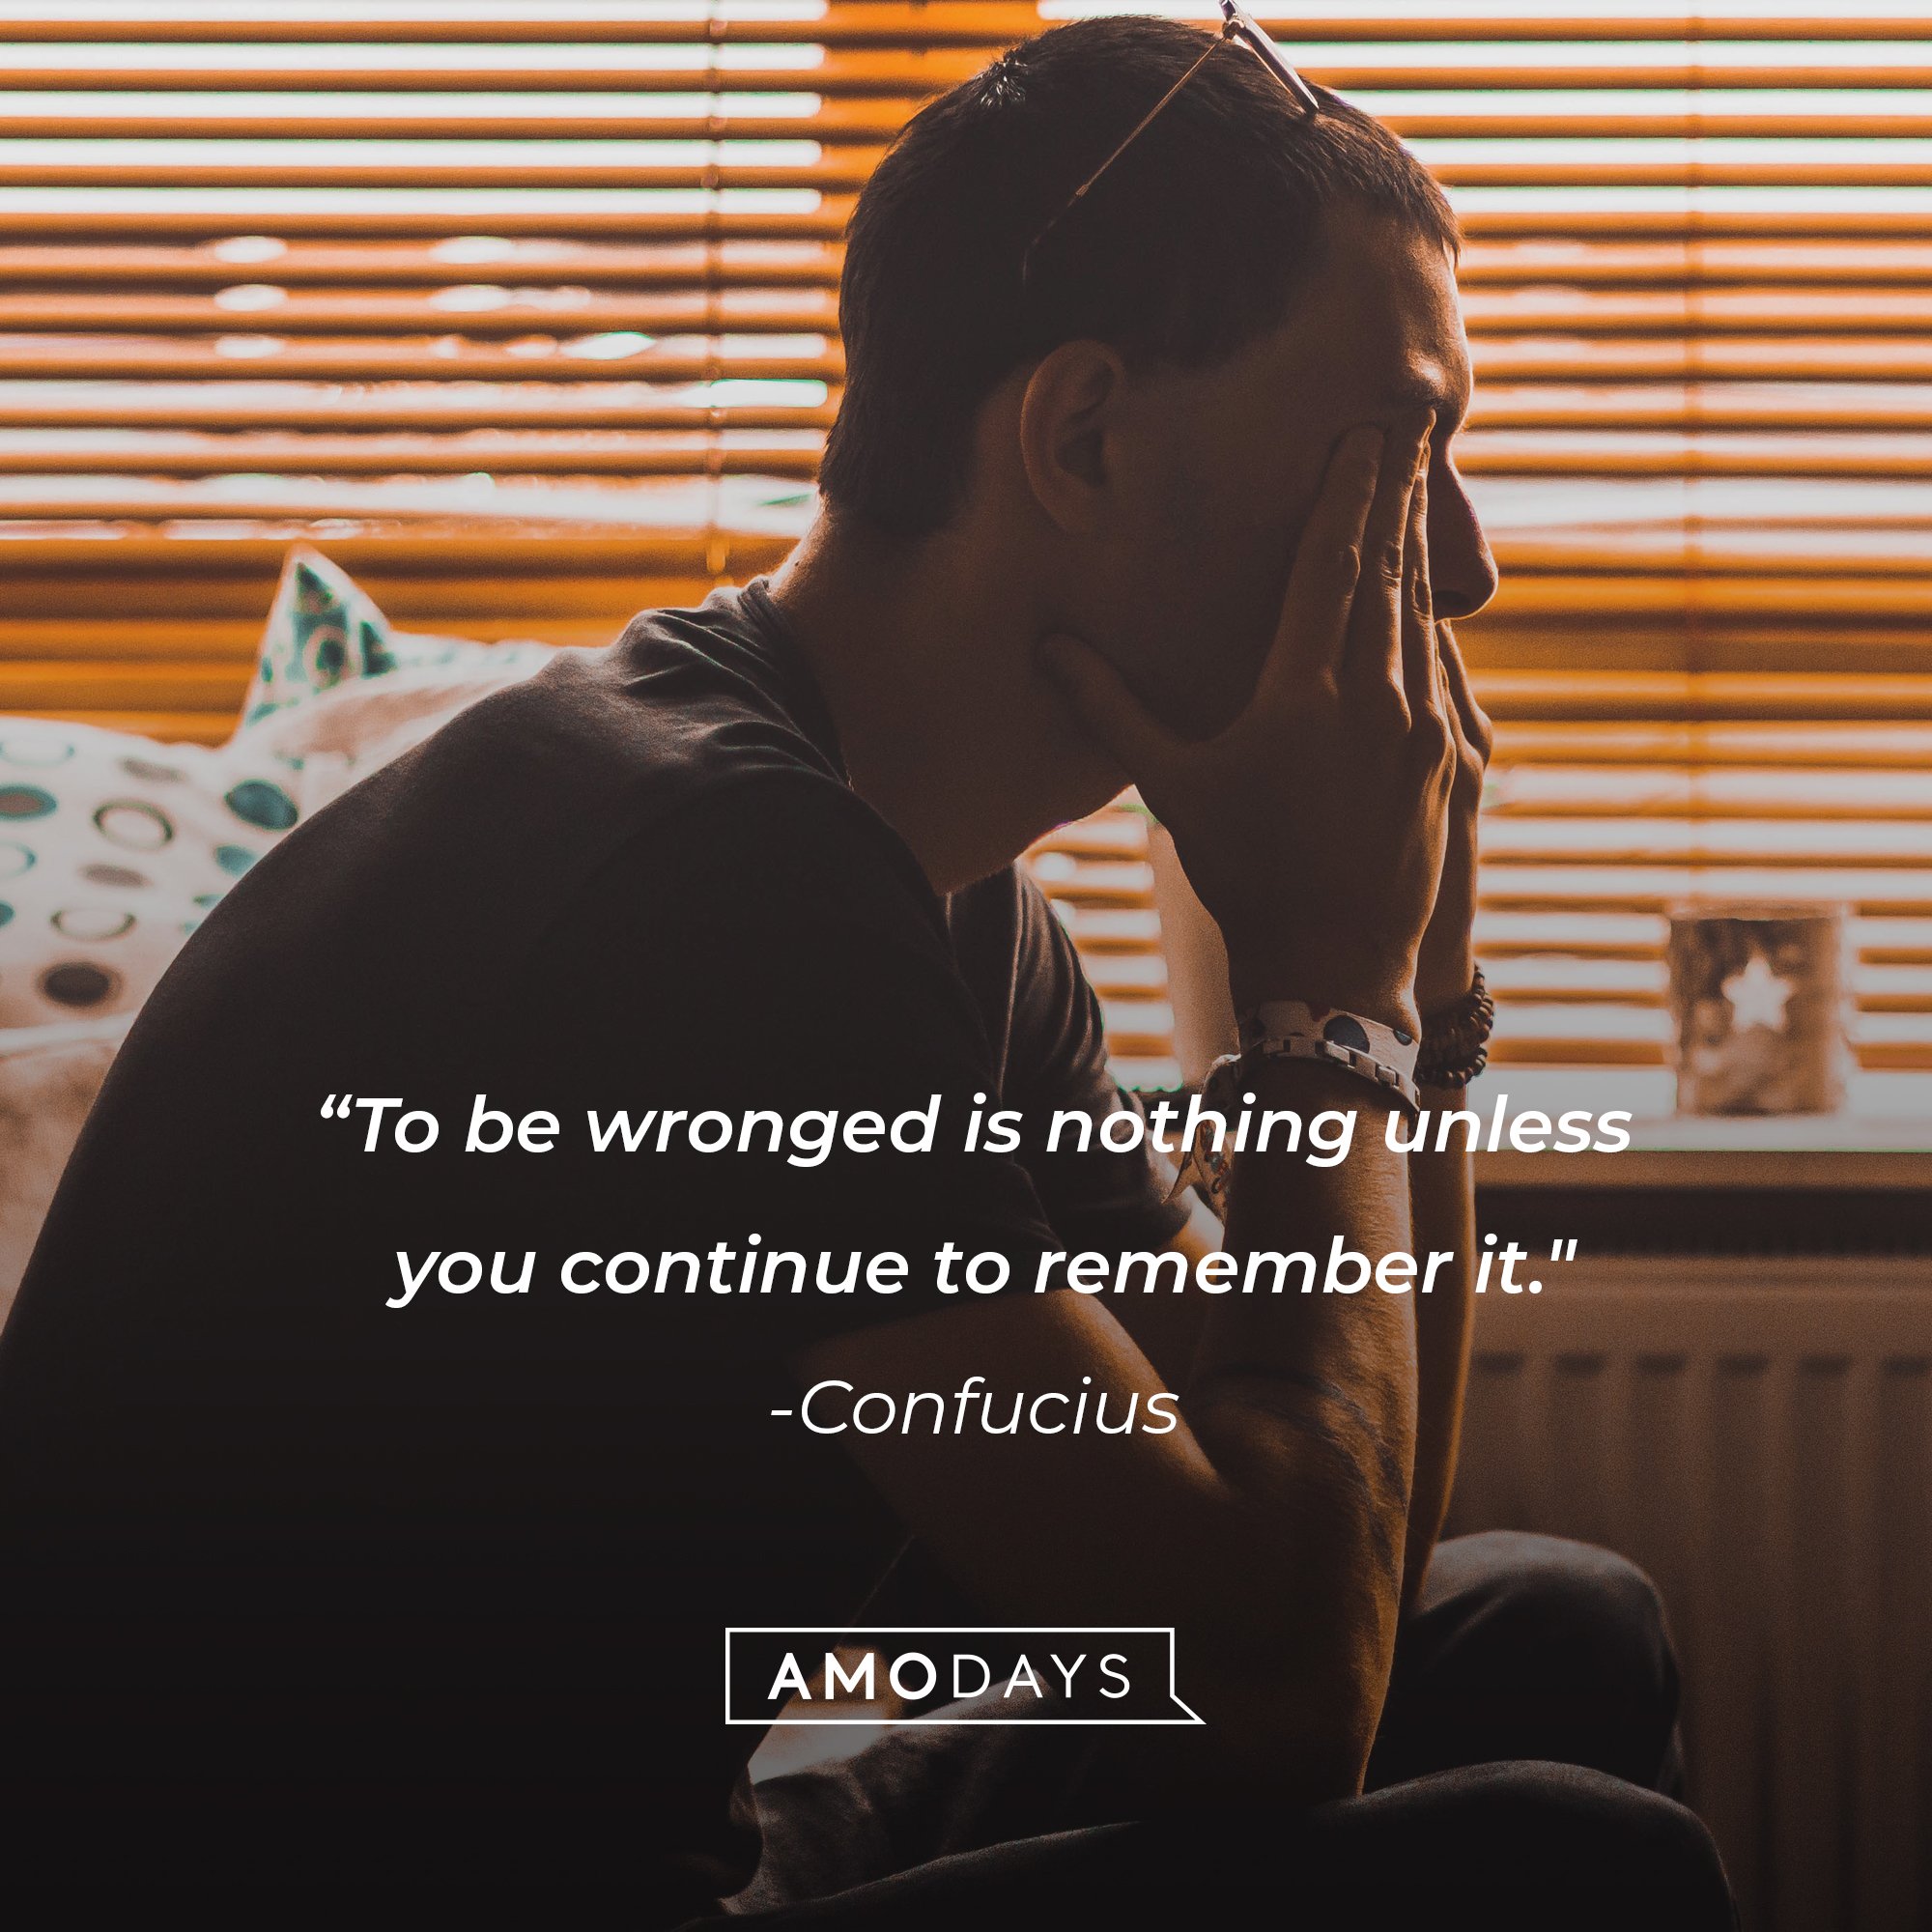    Confucius’ quote: “To be wronged is nothing unless you continue to remember it."  | Image: AmoDays     